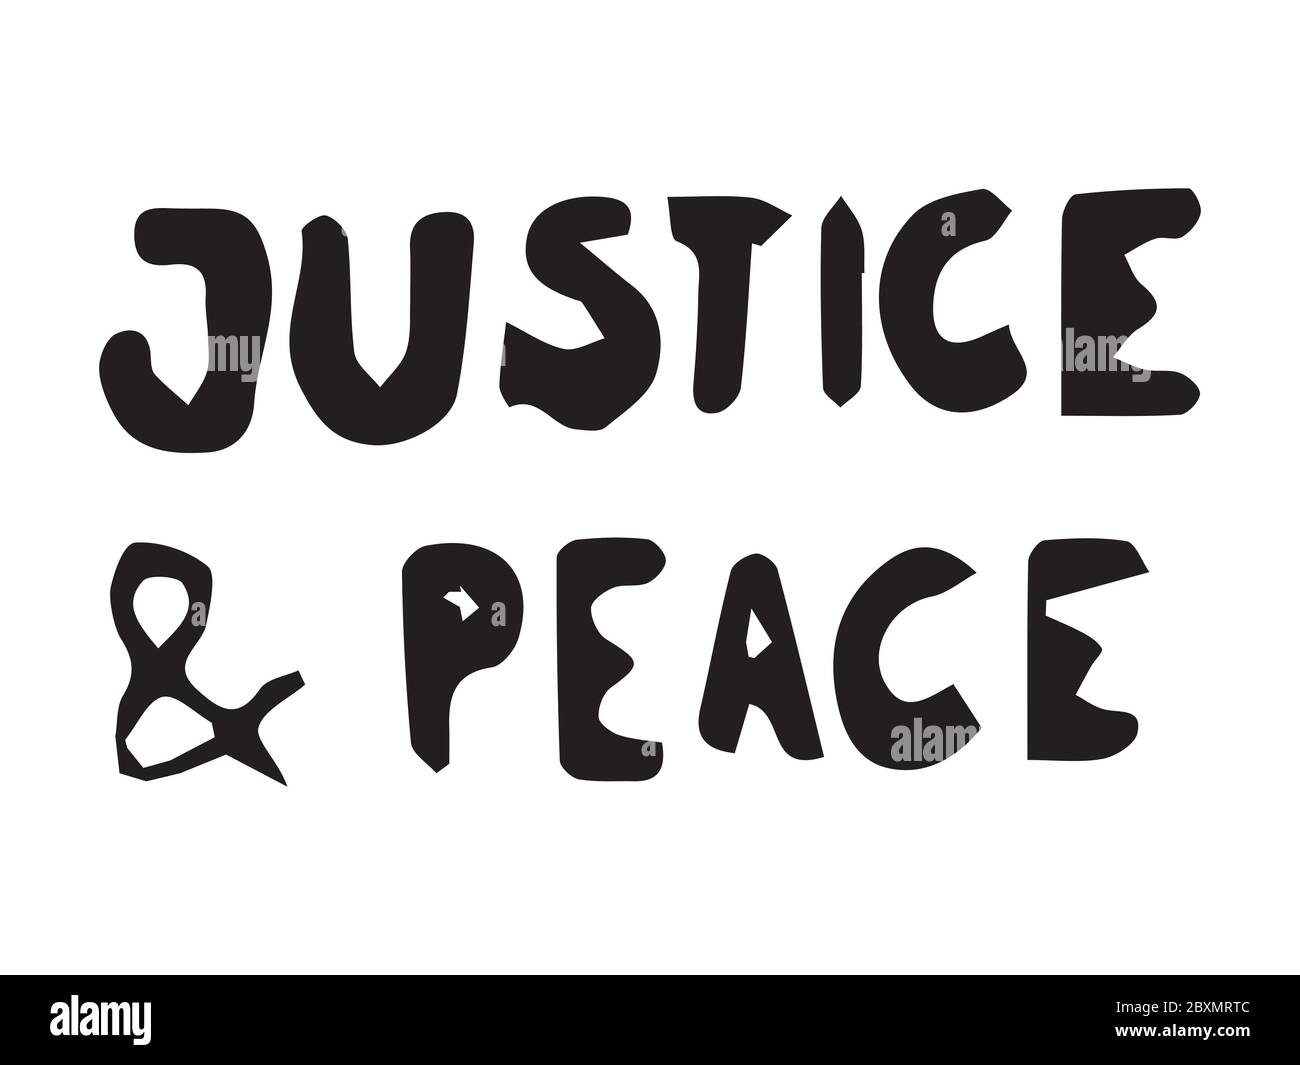 Justice and Peace text. Pictogram Illustration sign Depicting Peace and Justice. BLM Black Lives Matter. Black and white EPS Vector File. Stock Vector